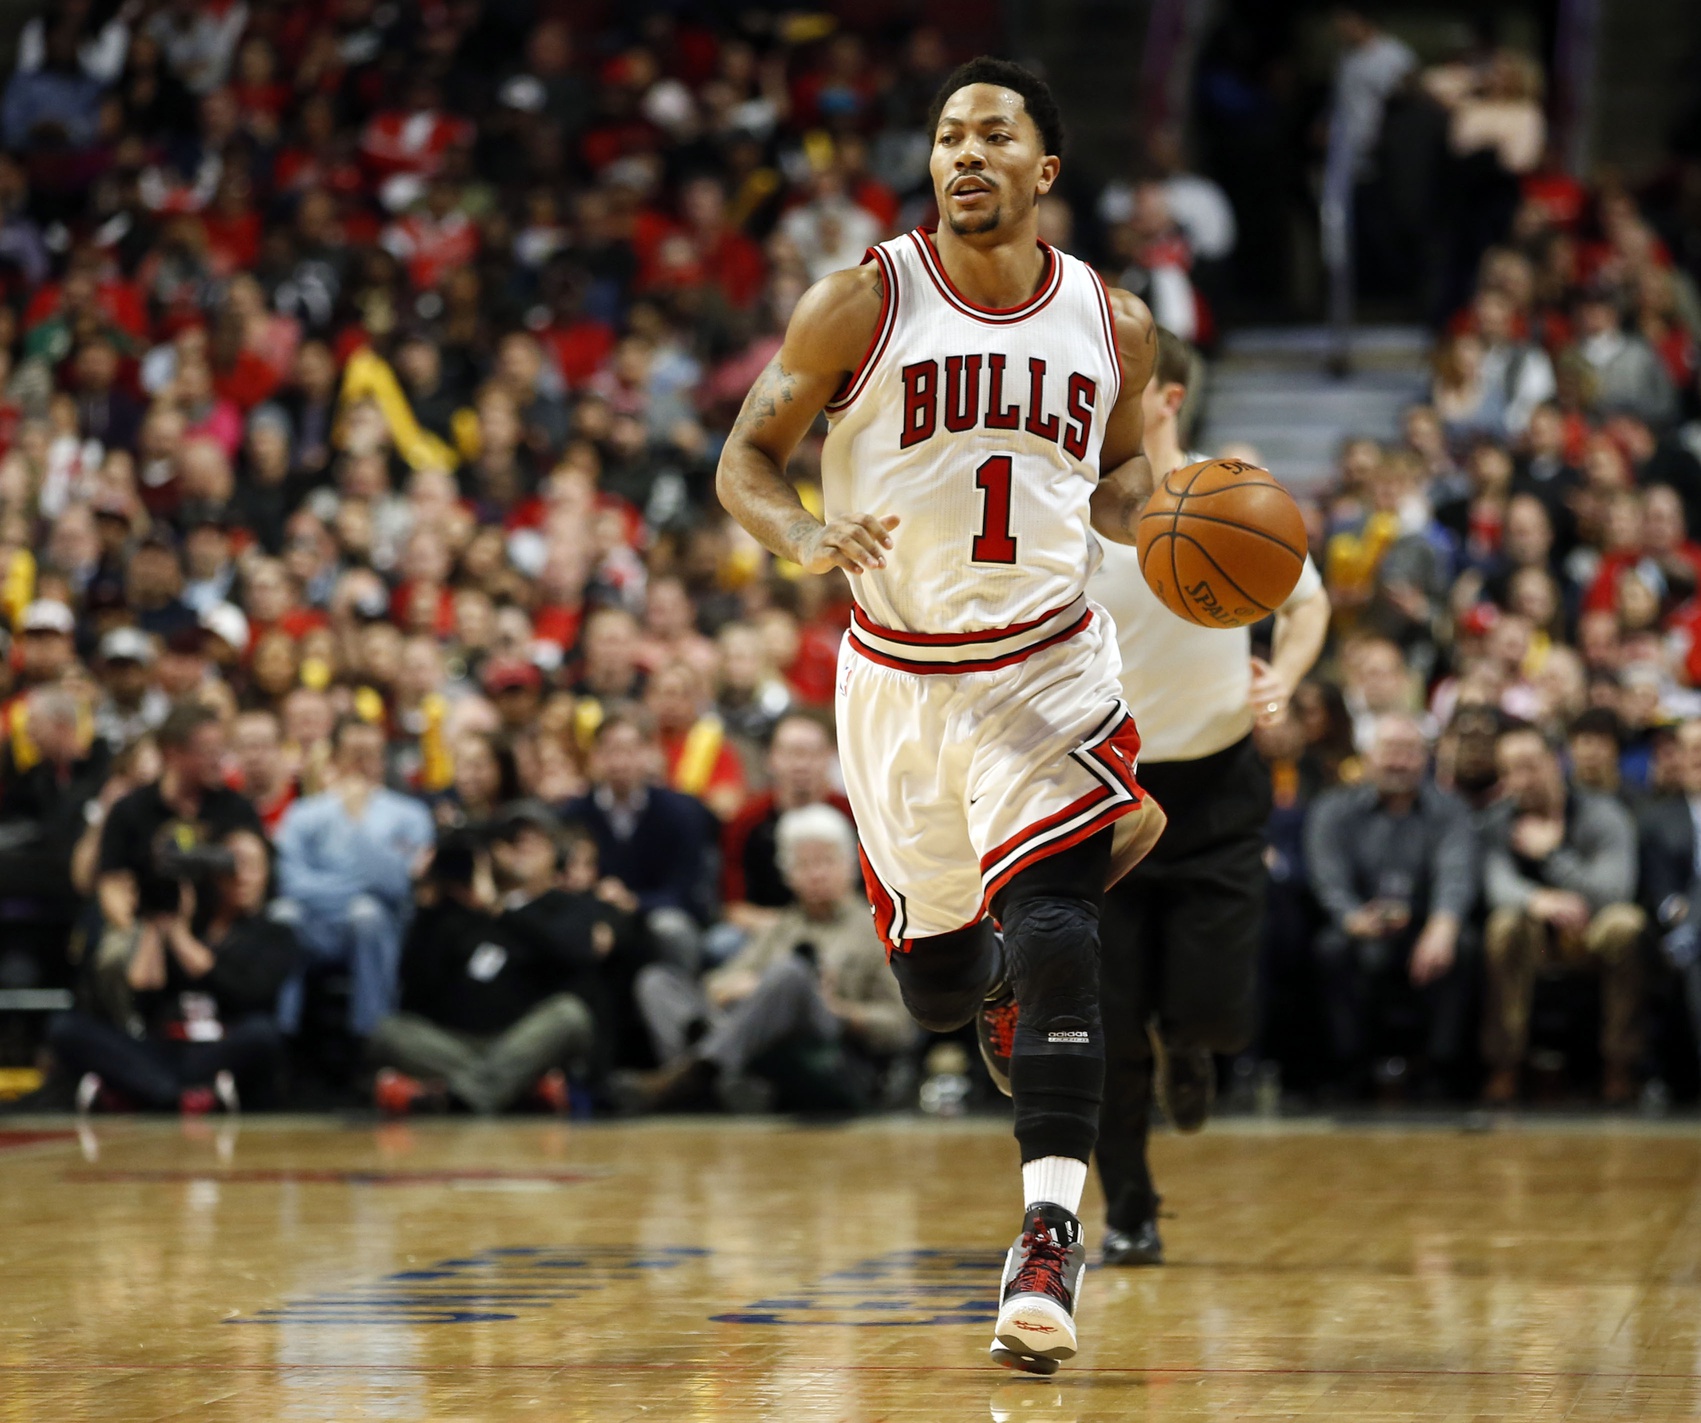 Derrick Rose: A Possible Reunion in Chicago?